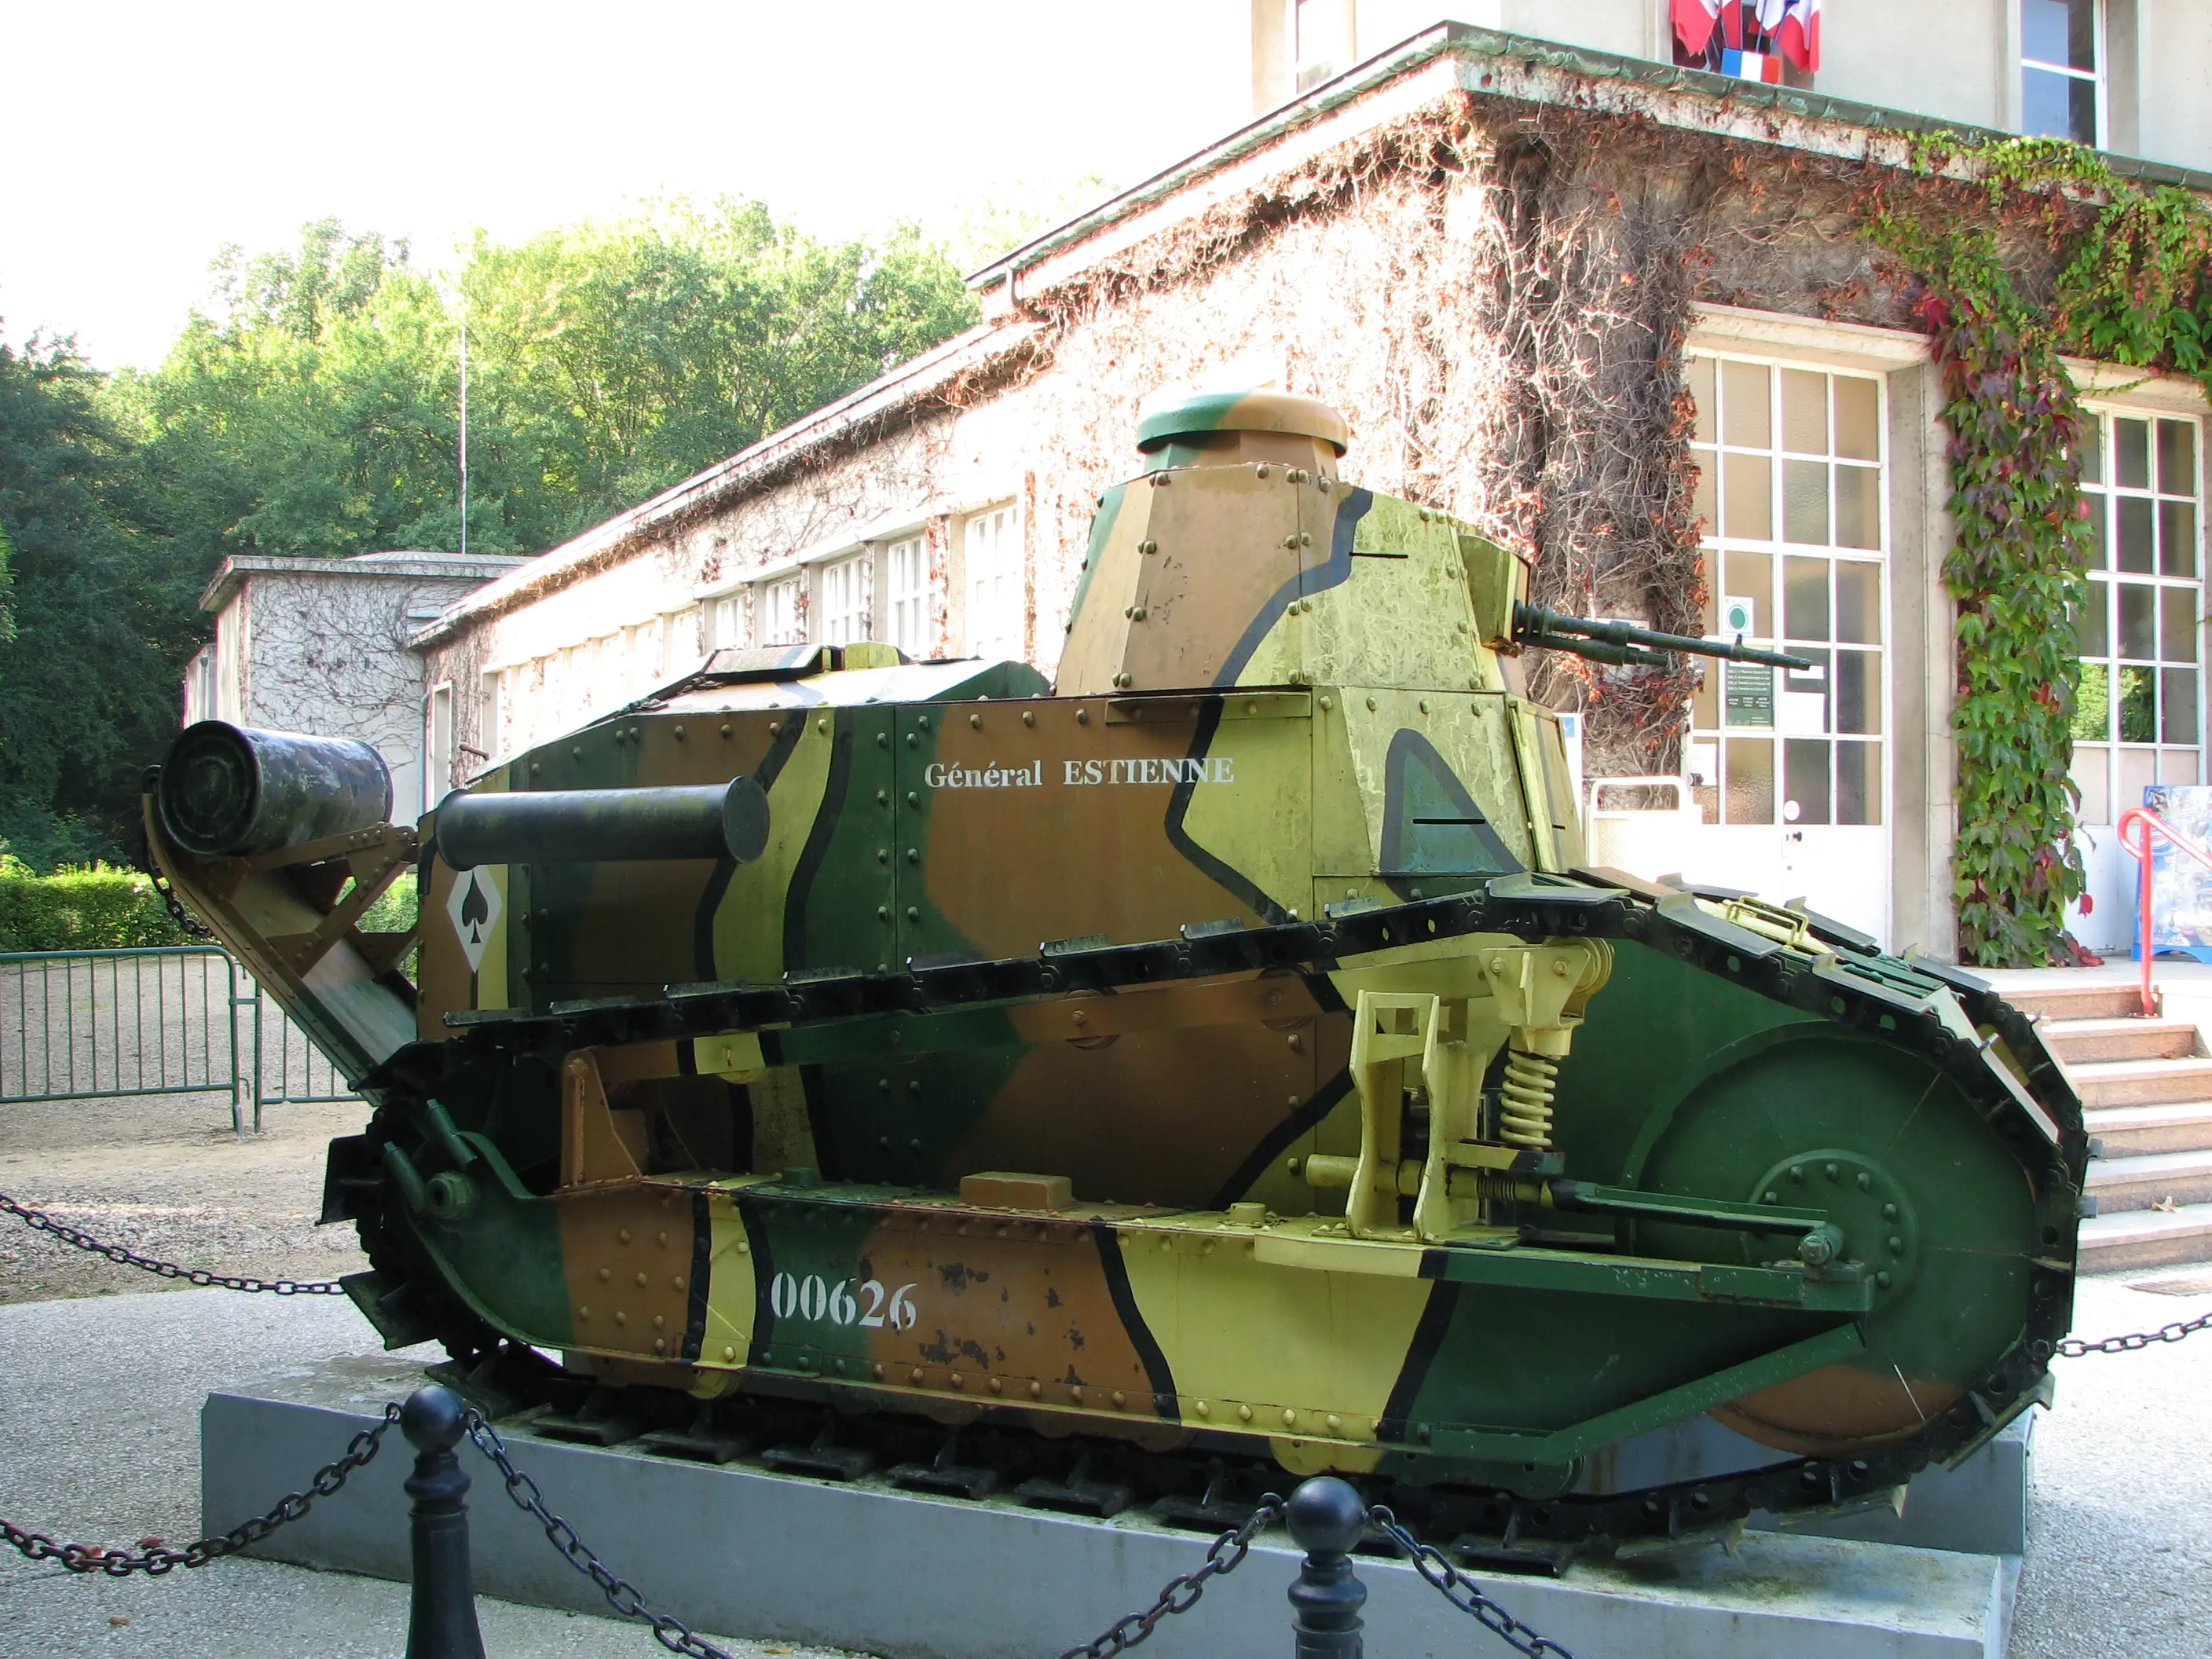 The other side of the Compiègne tank. Note the 8mm Hotchkiss armament. 